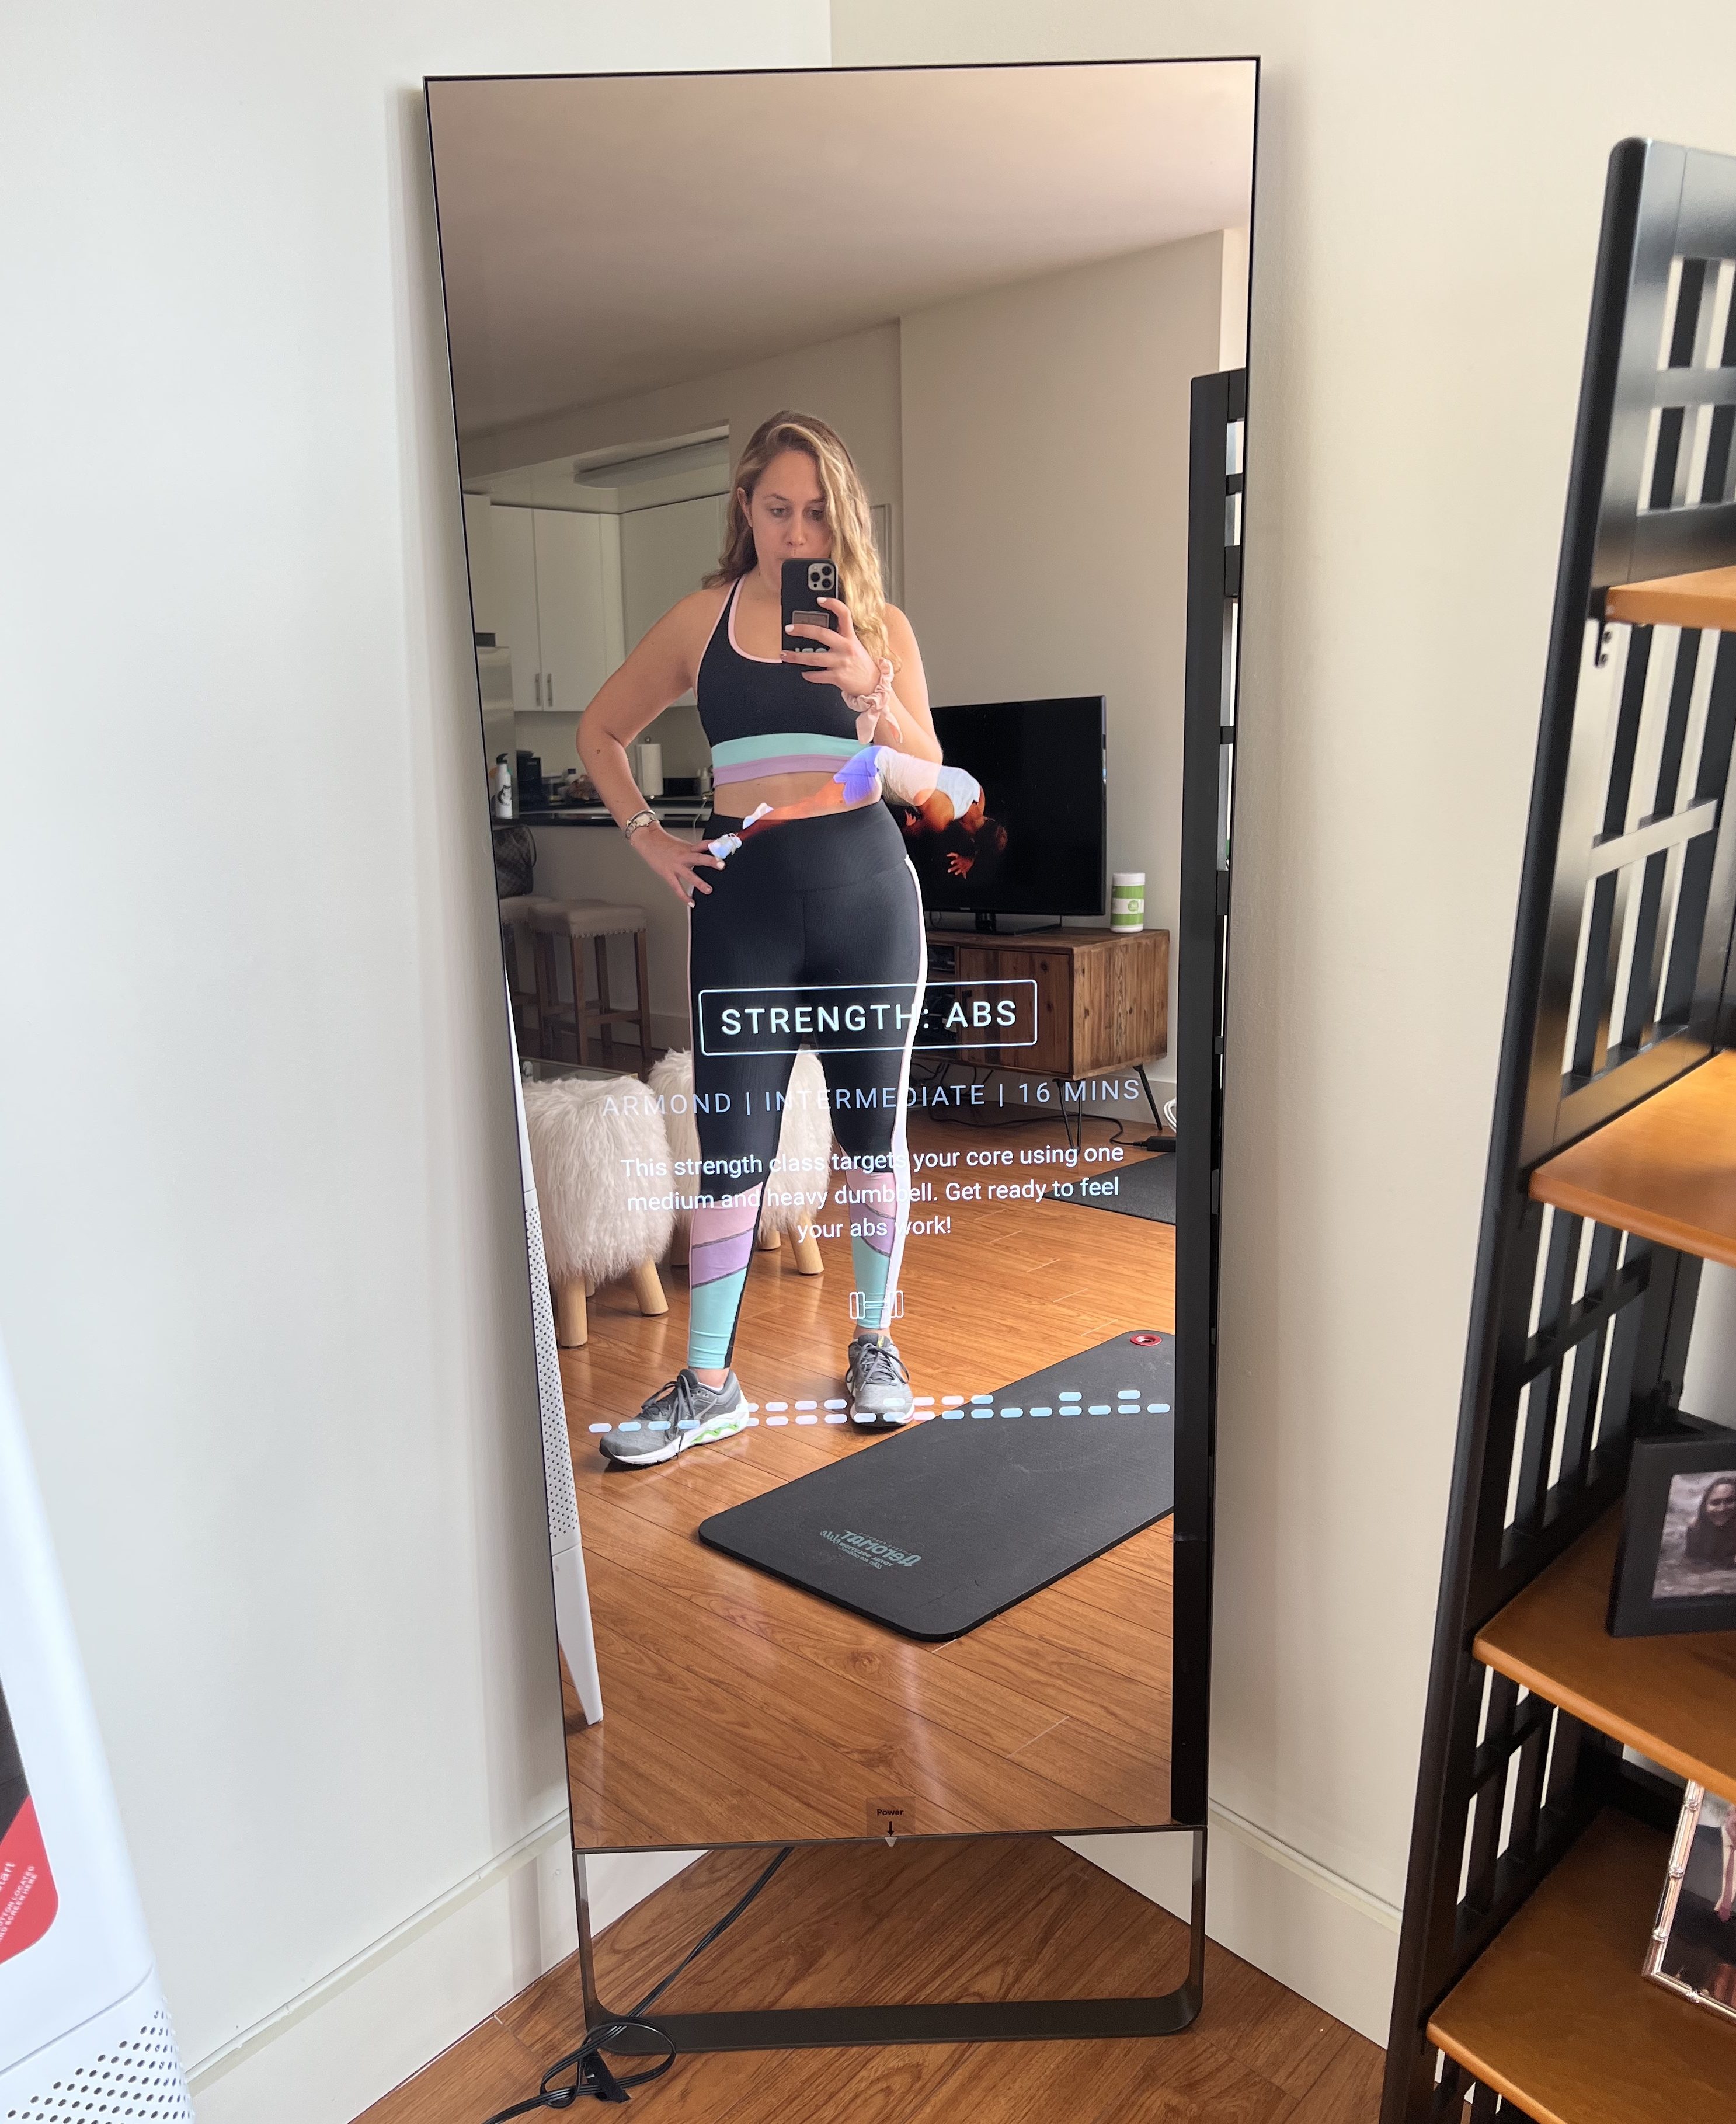 The Mirror Took My Workout Routine To The Next Level. Here’s How.